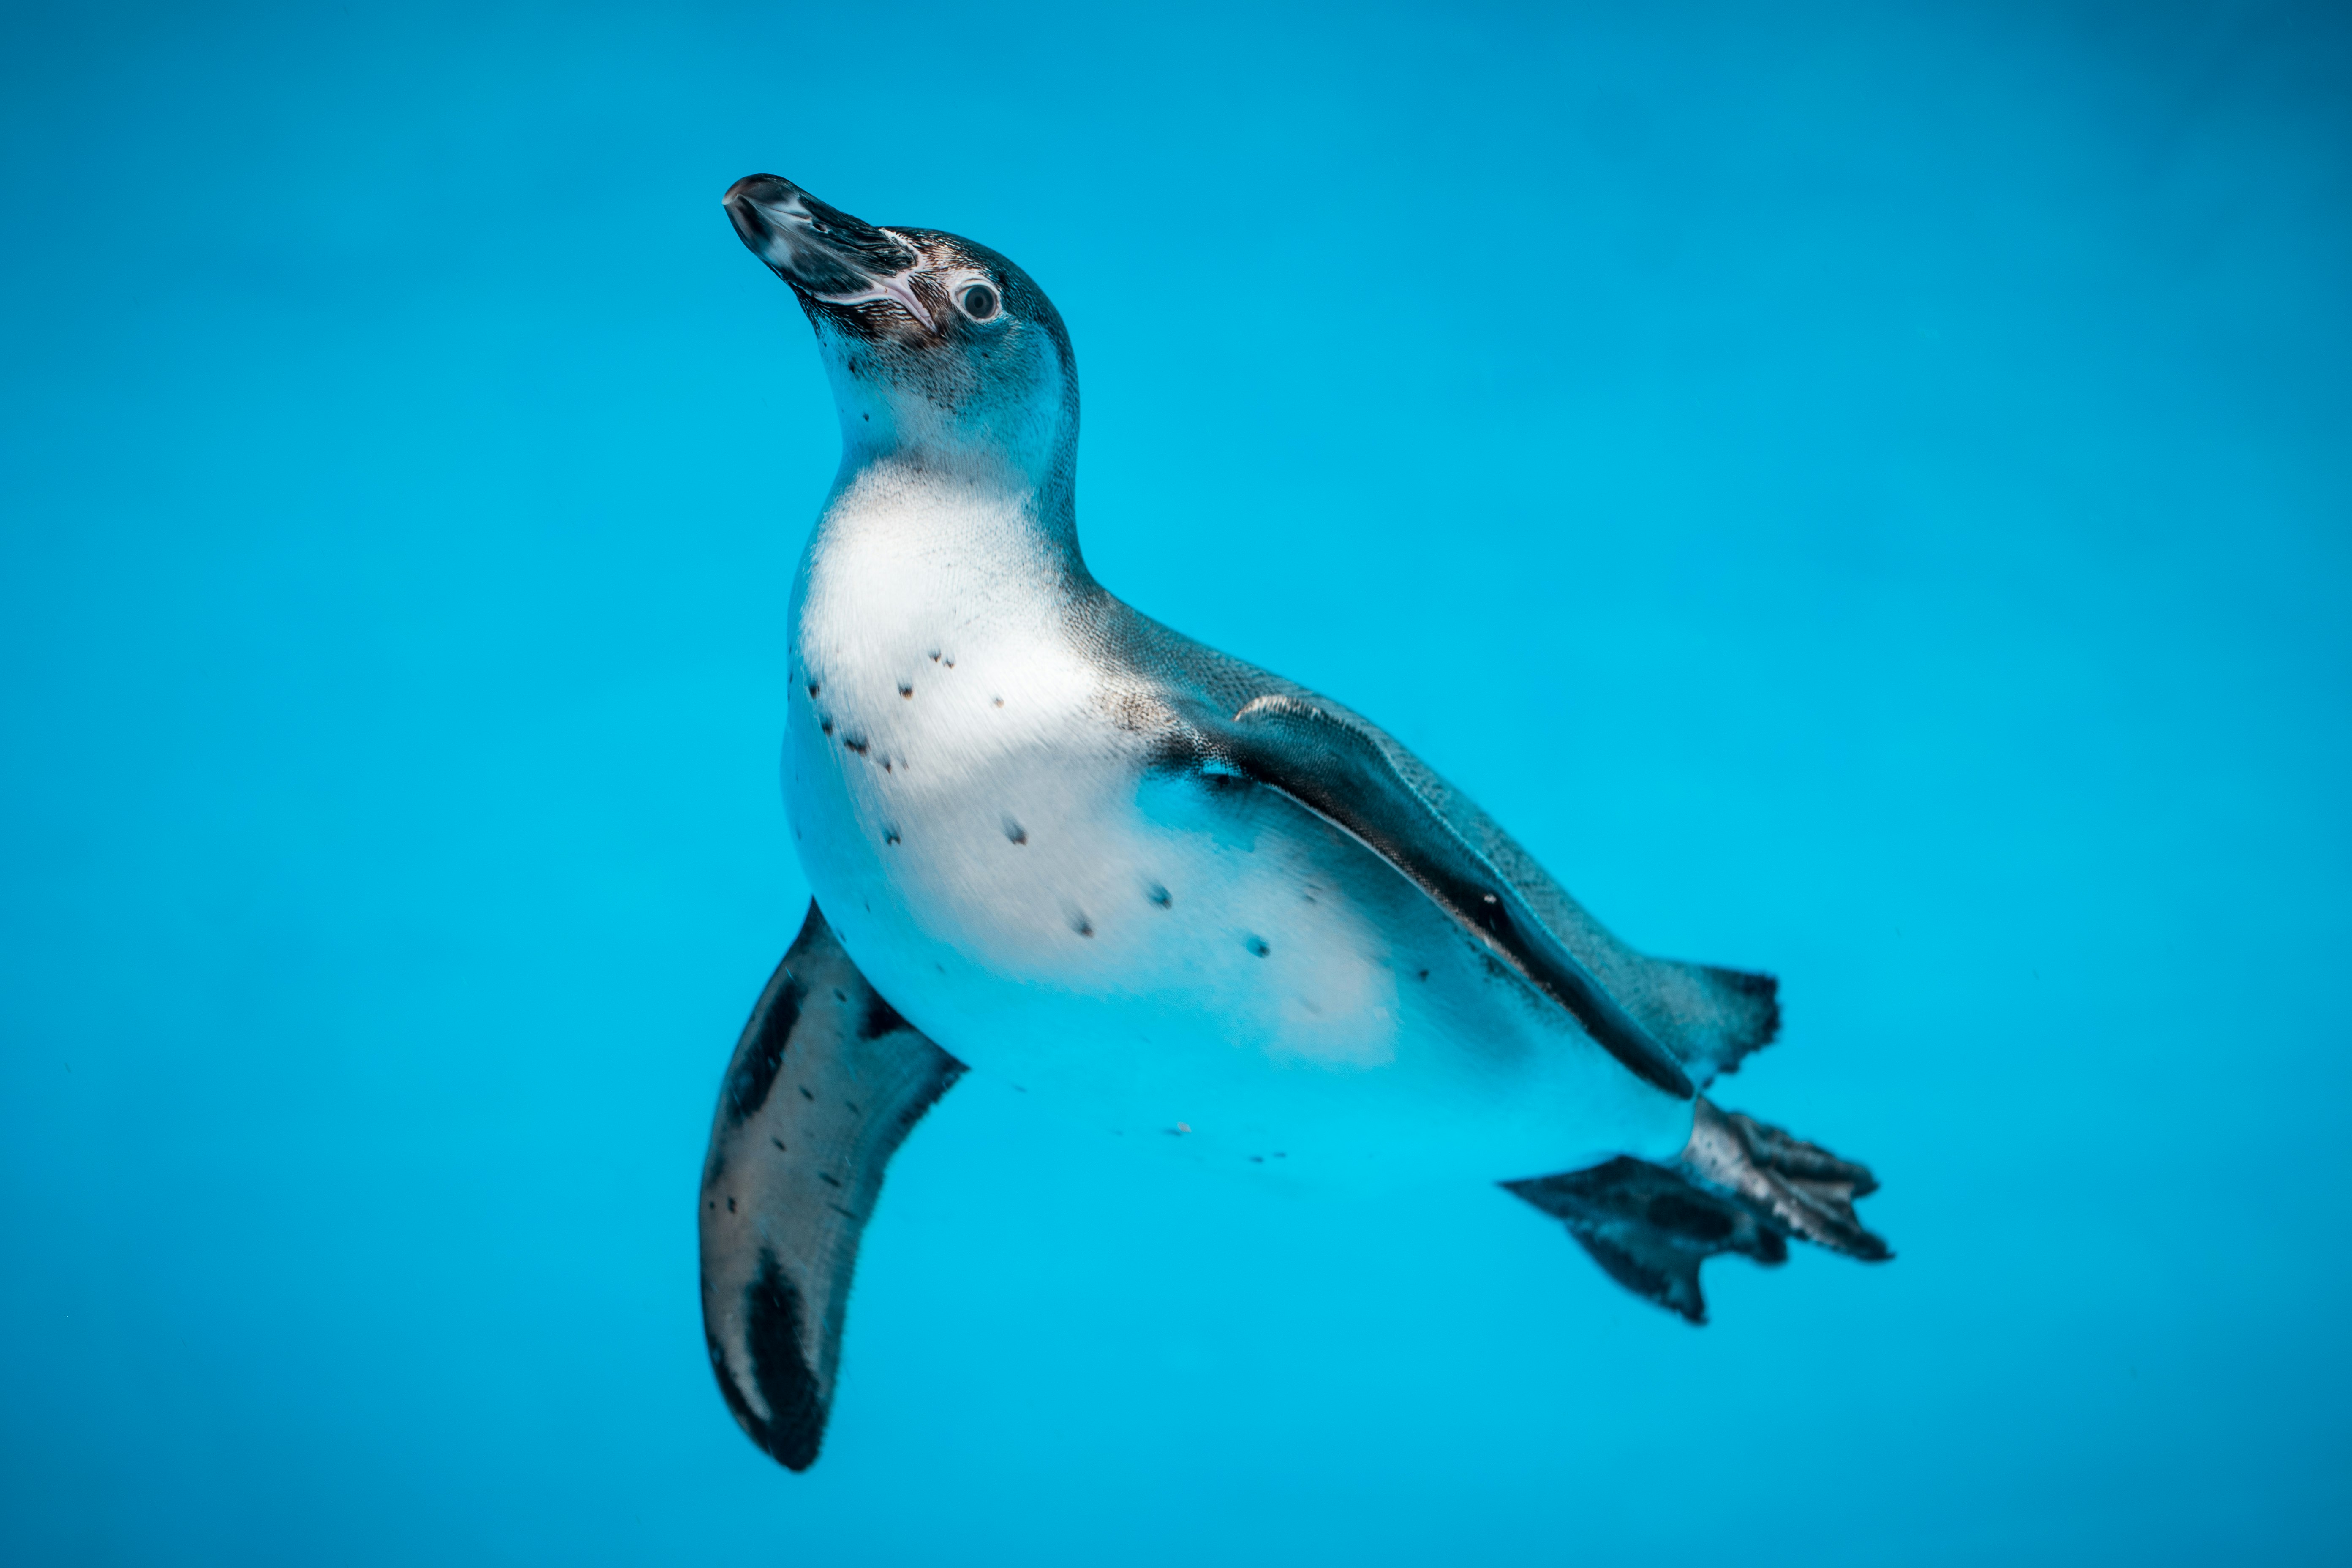 low light photography of white and black penguin